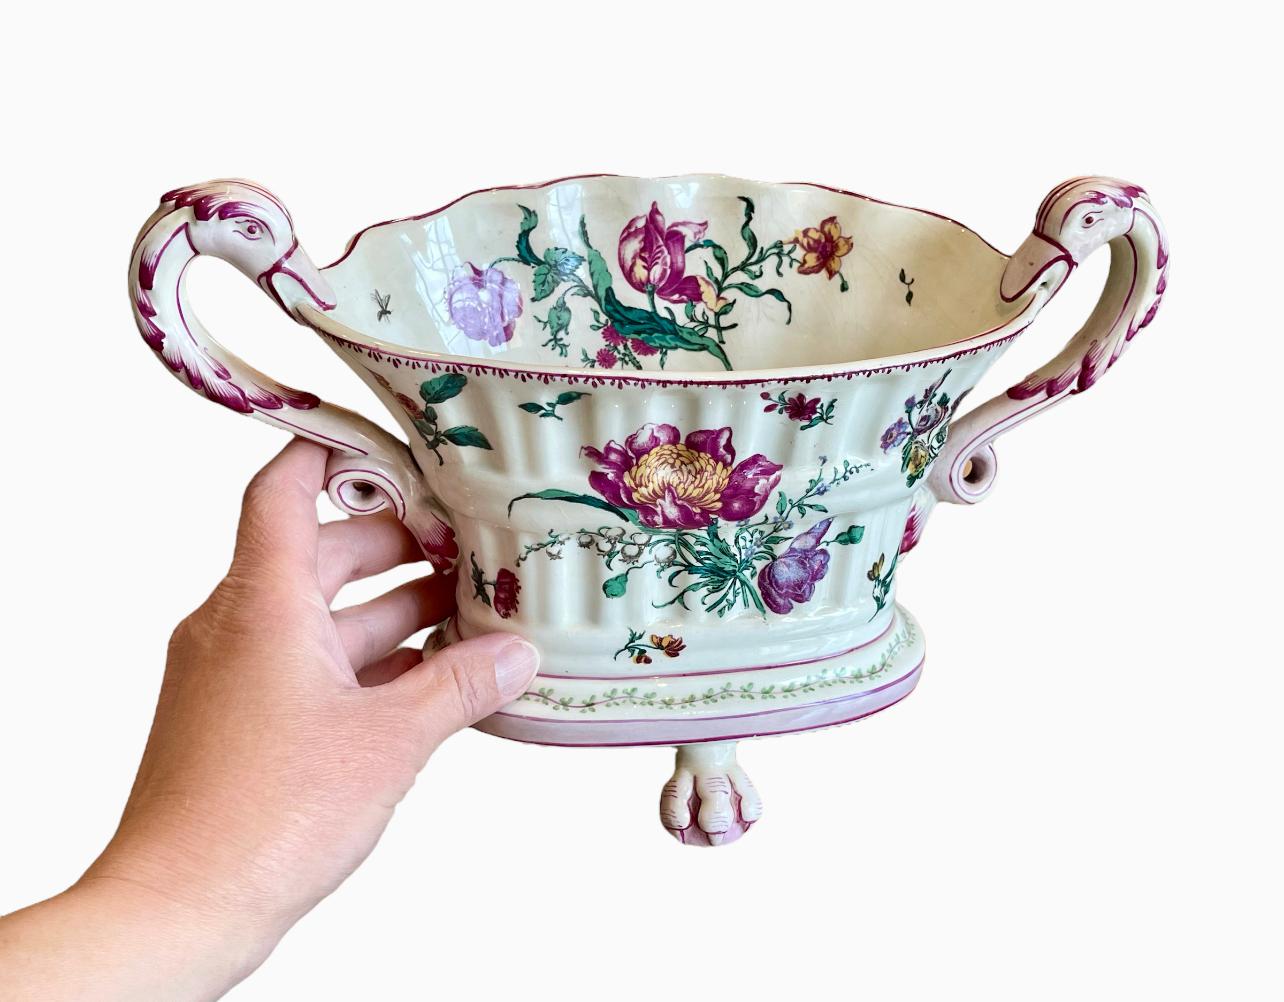 Lovely little Gien earthenware planter or planter with floral decoration. Dominant purple and green colors on an ecru background. On either side, swan neck shaped handles. It rests on three claw feet and has the Gien factory mark underneath. It is